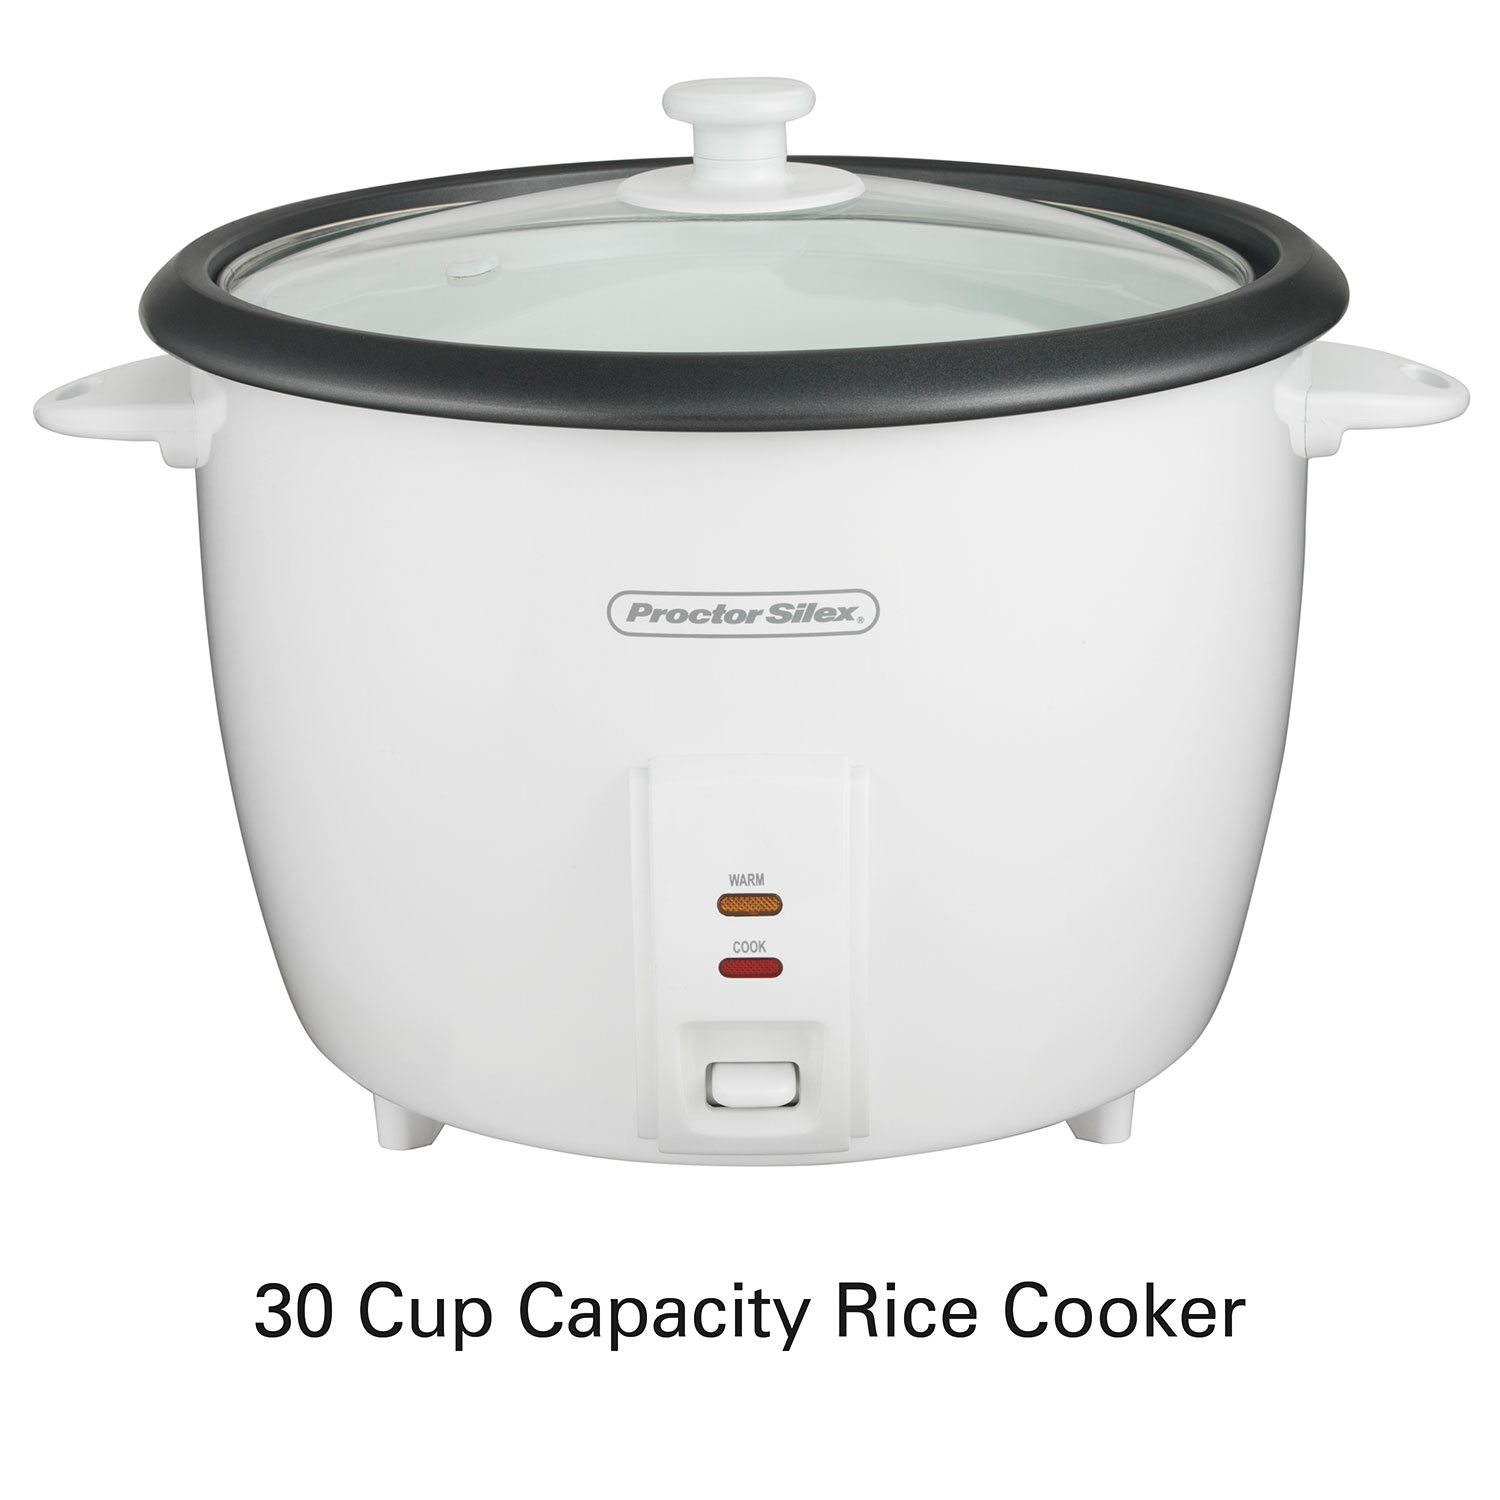 How Big Is The Rice Cooker Cup